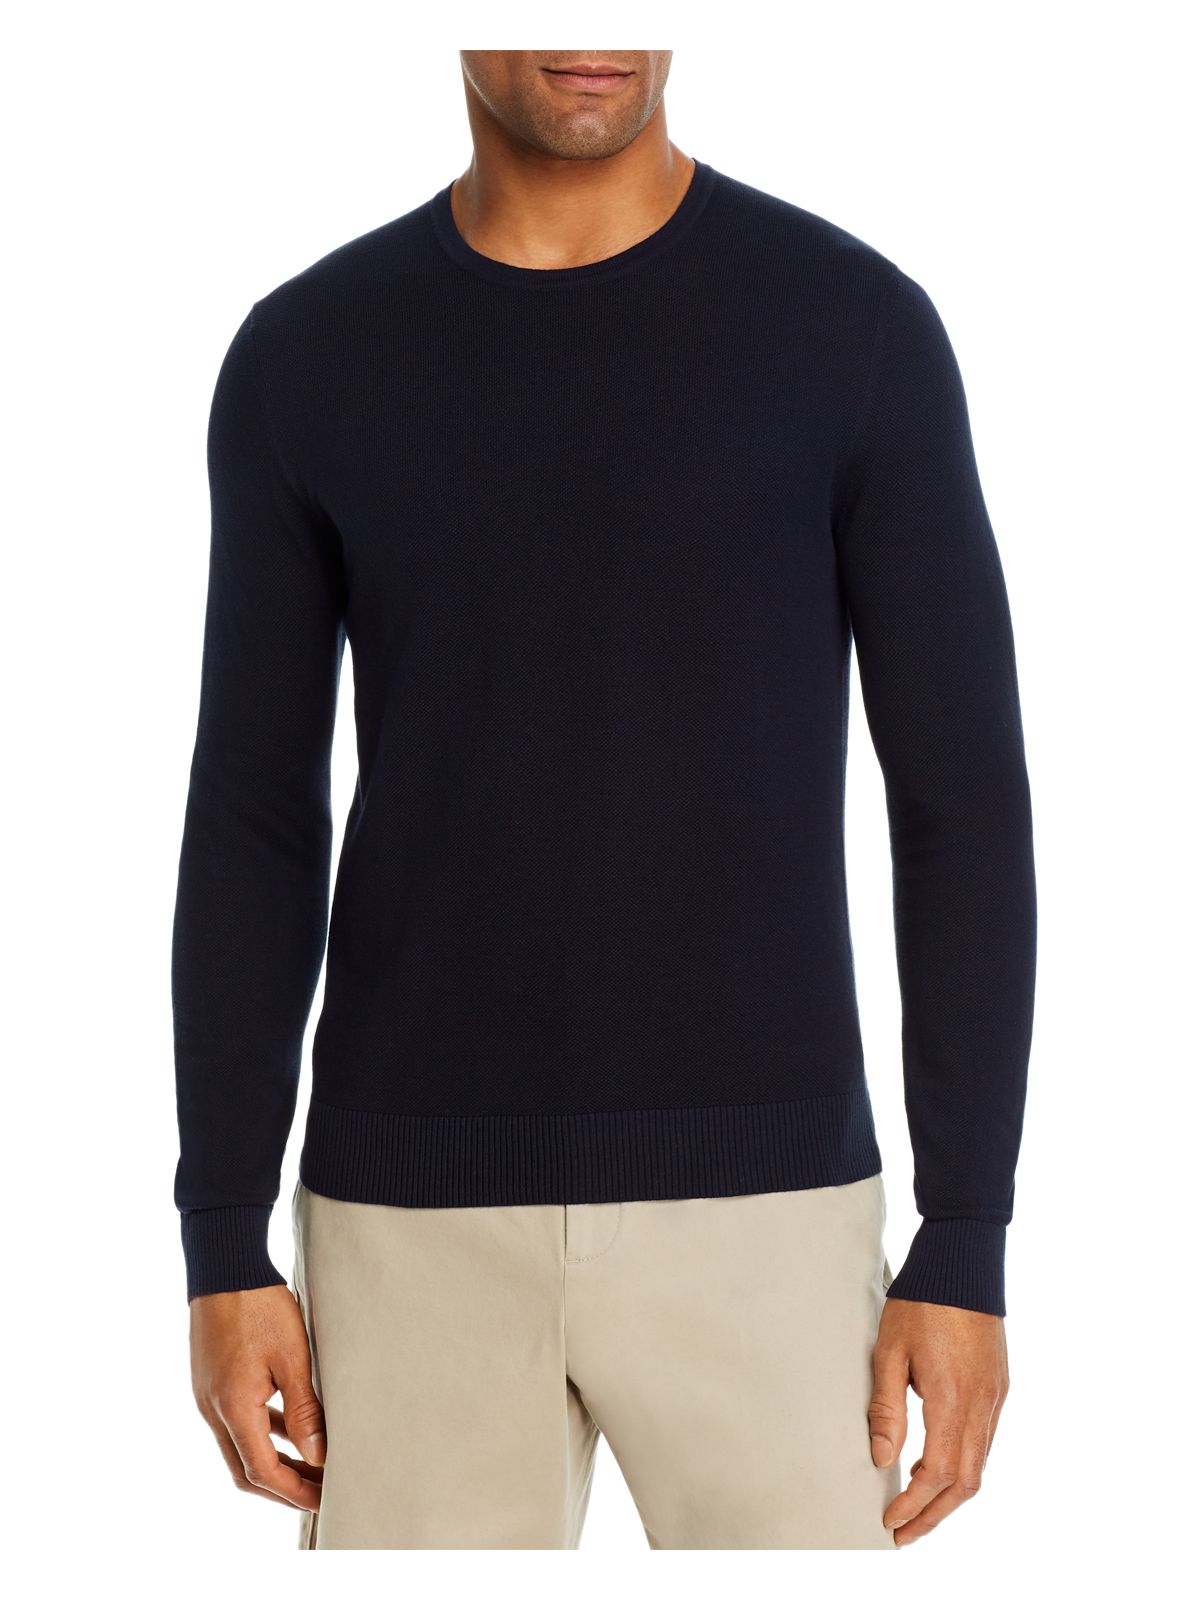 DYLAN GRAY Mens Navy Long Sleeve Crew Neck Classic Fit Sweater M